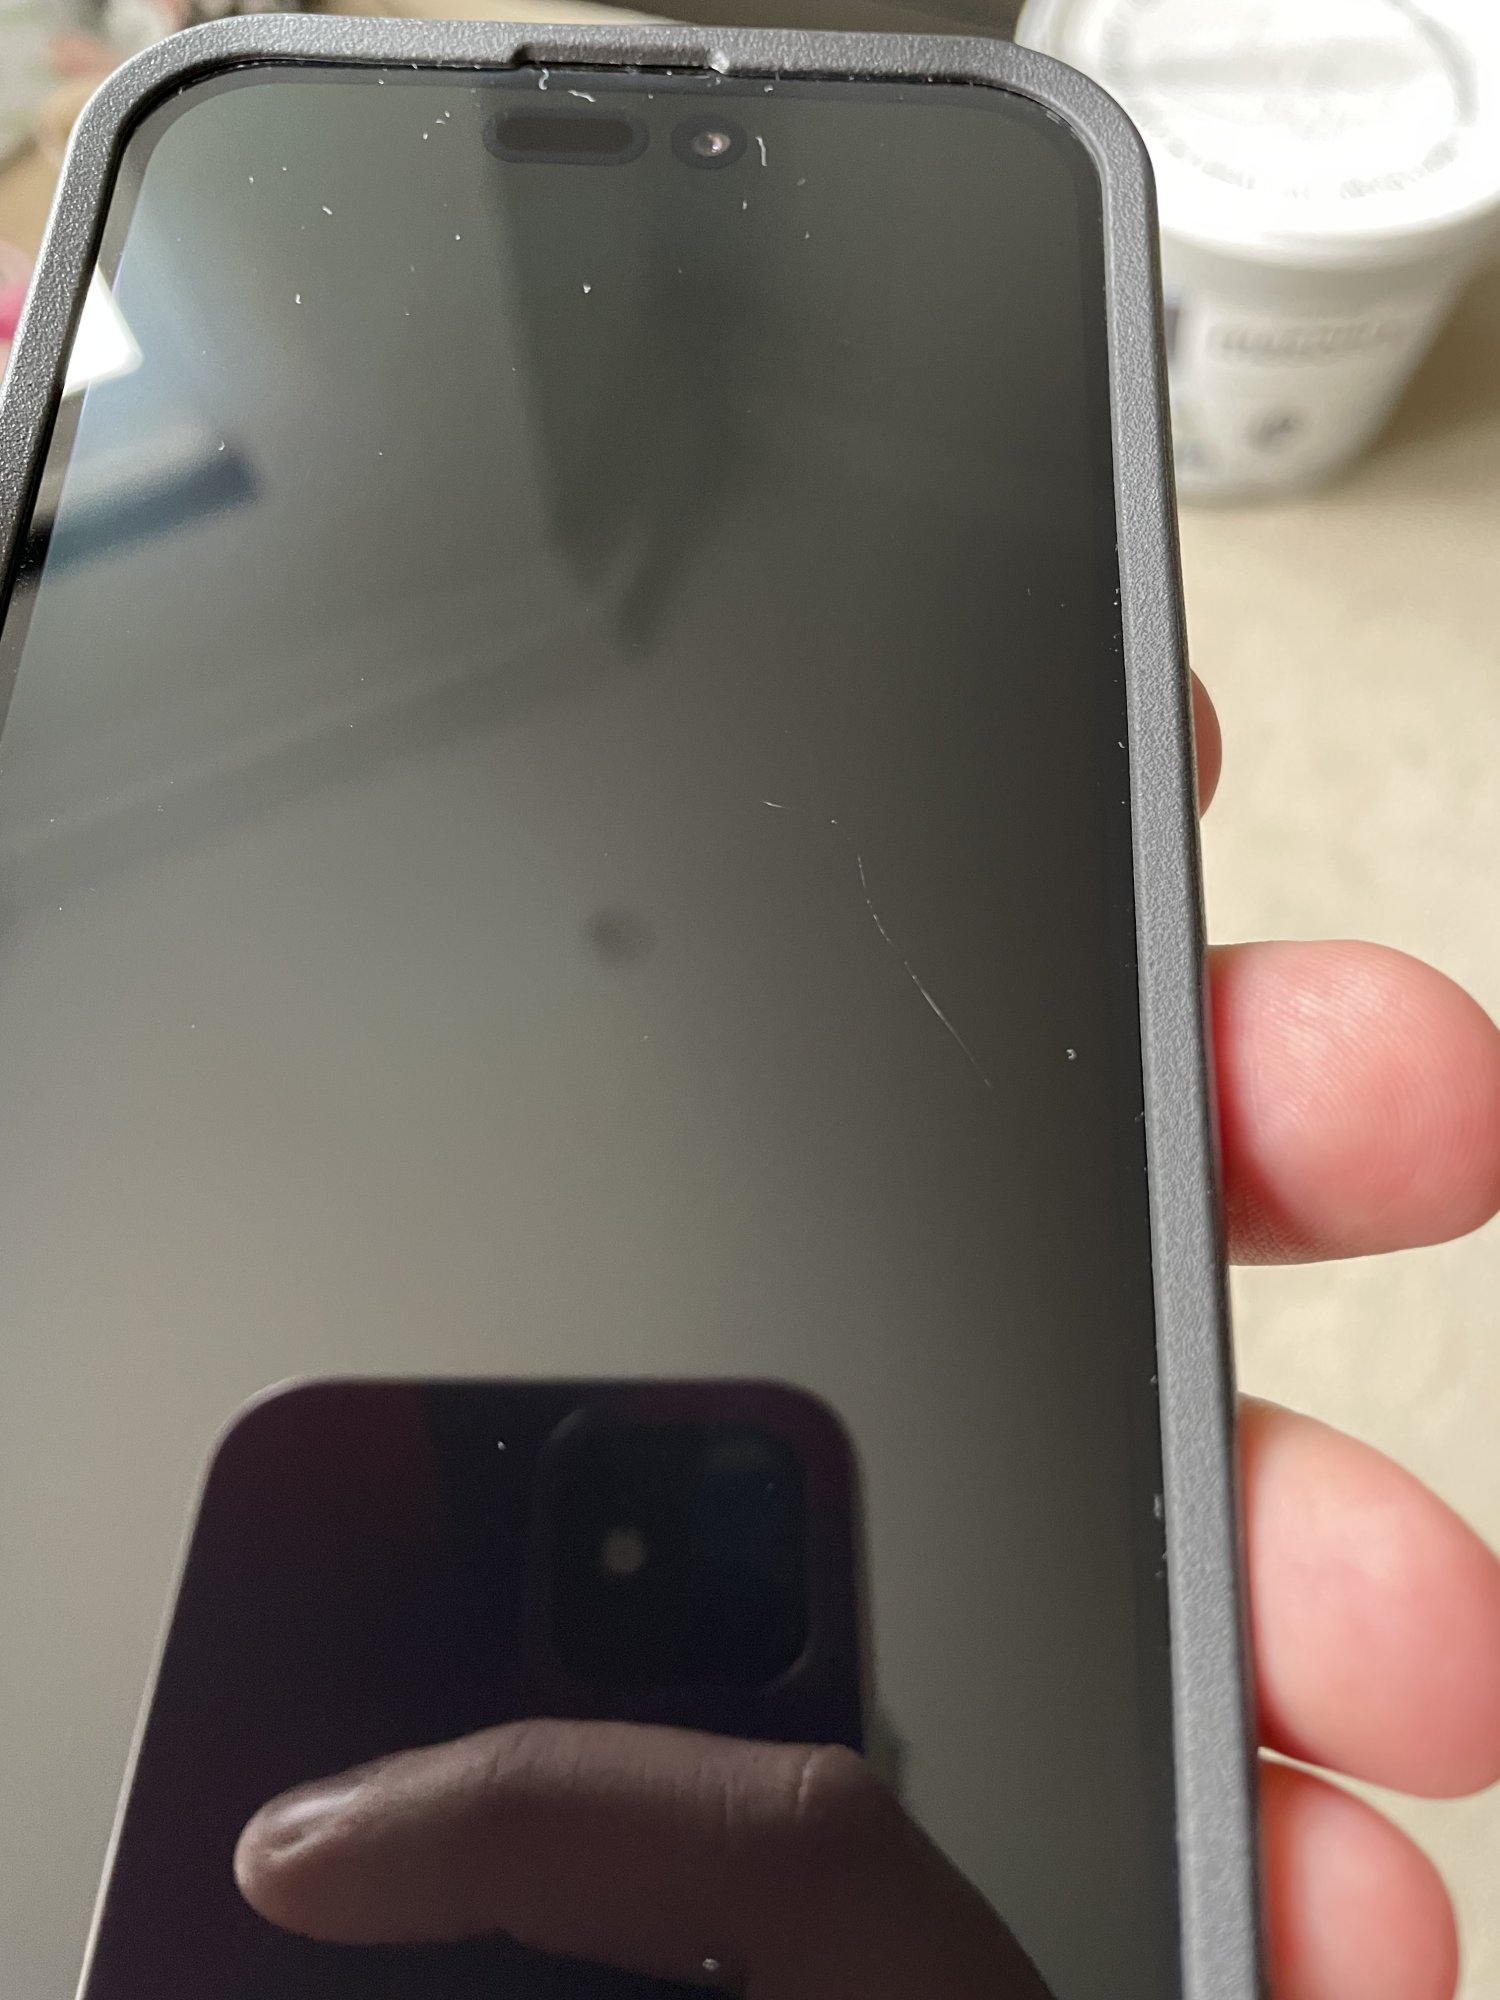 Scratched Screen - What are my options?